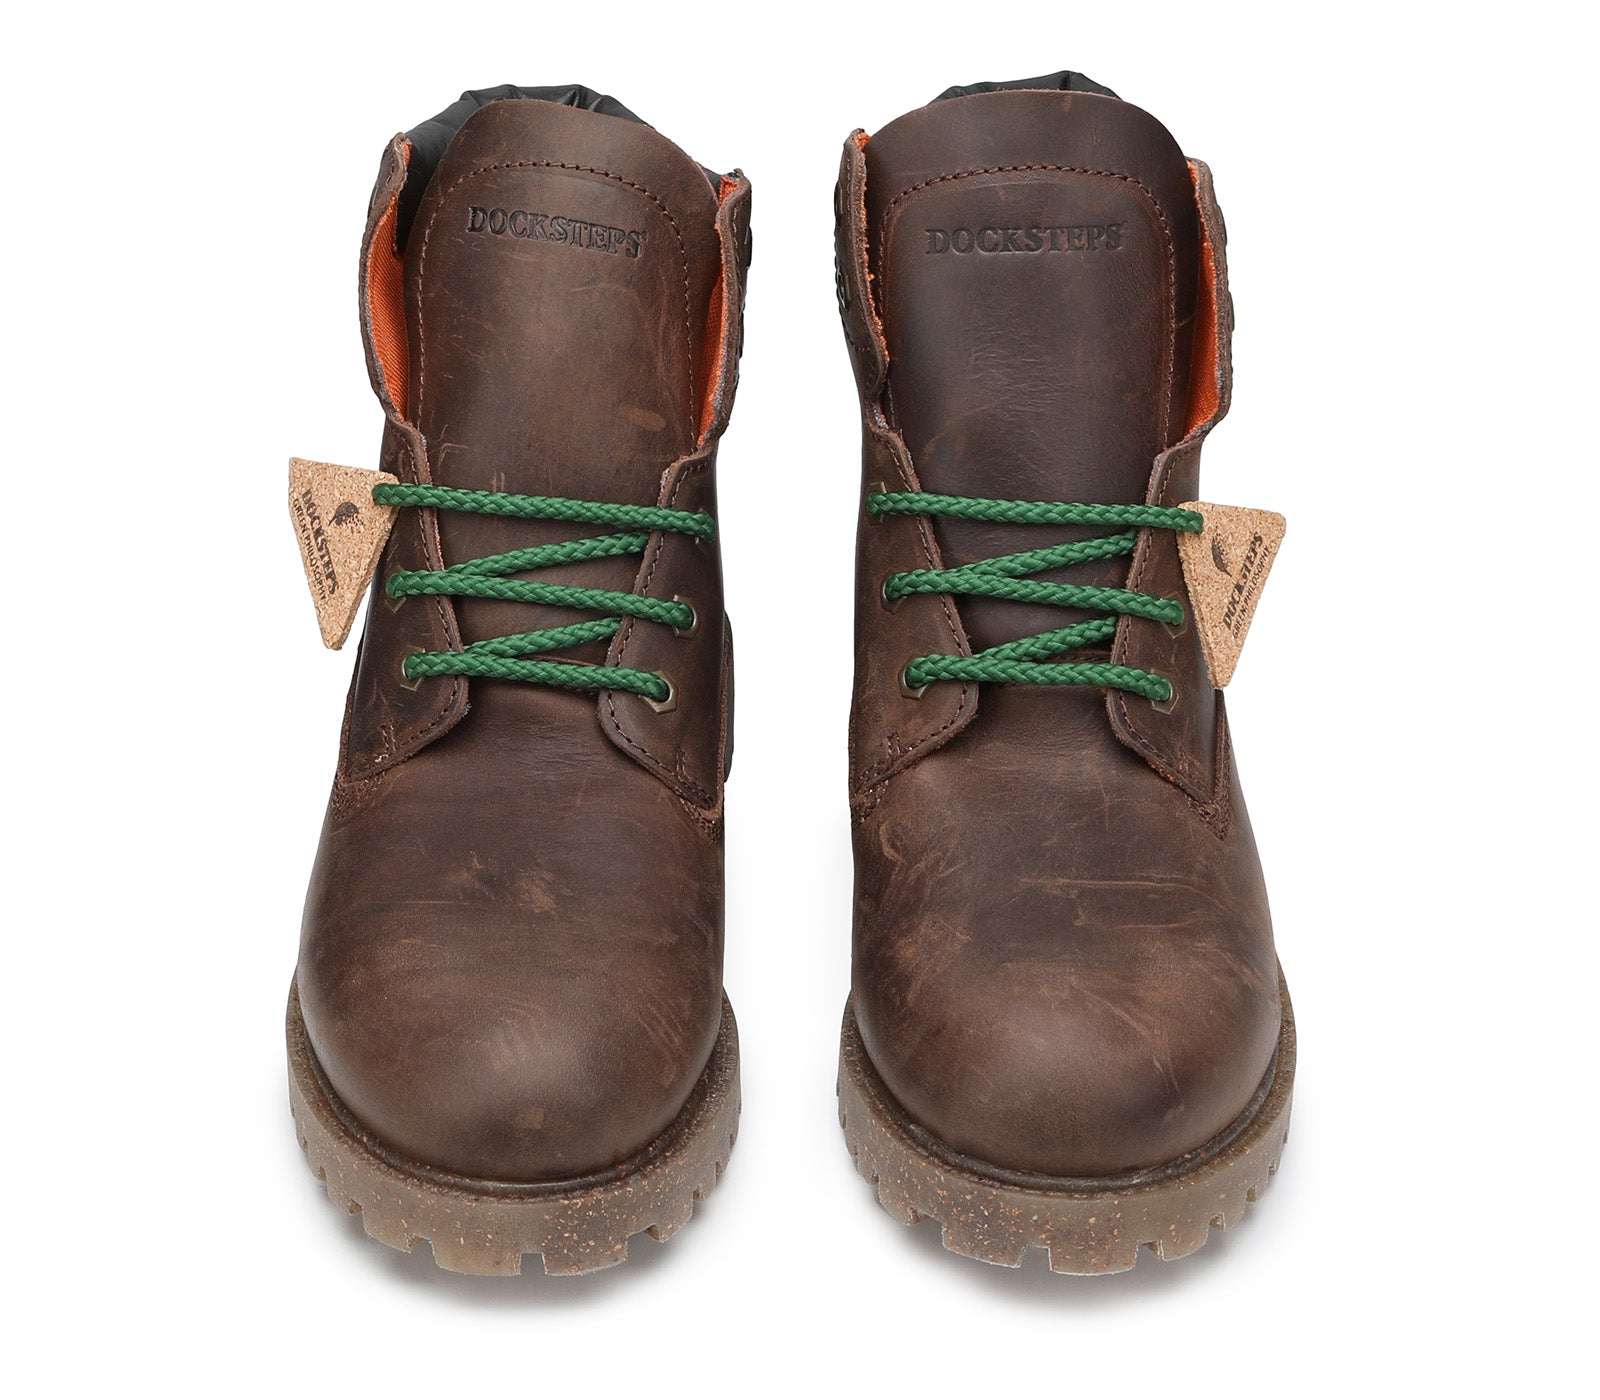 Men's Dark Brown Laced Boot Made from Sustainable Materials 